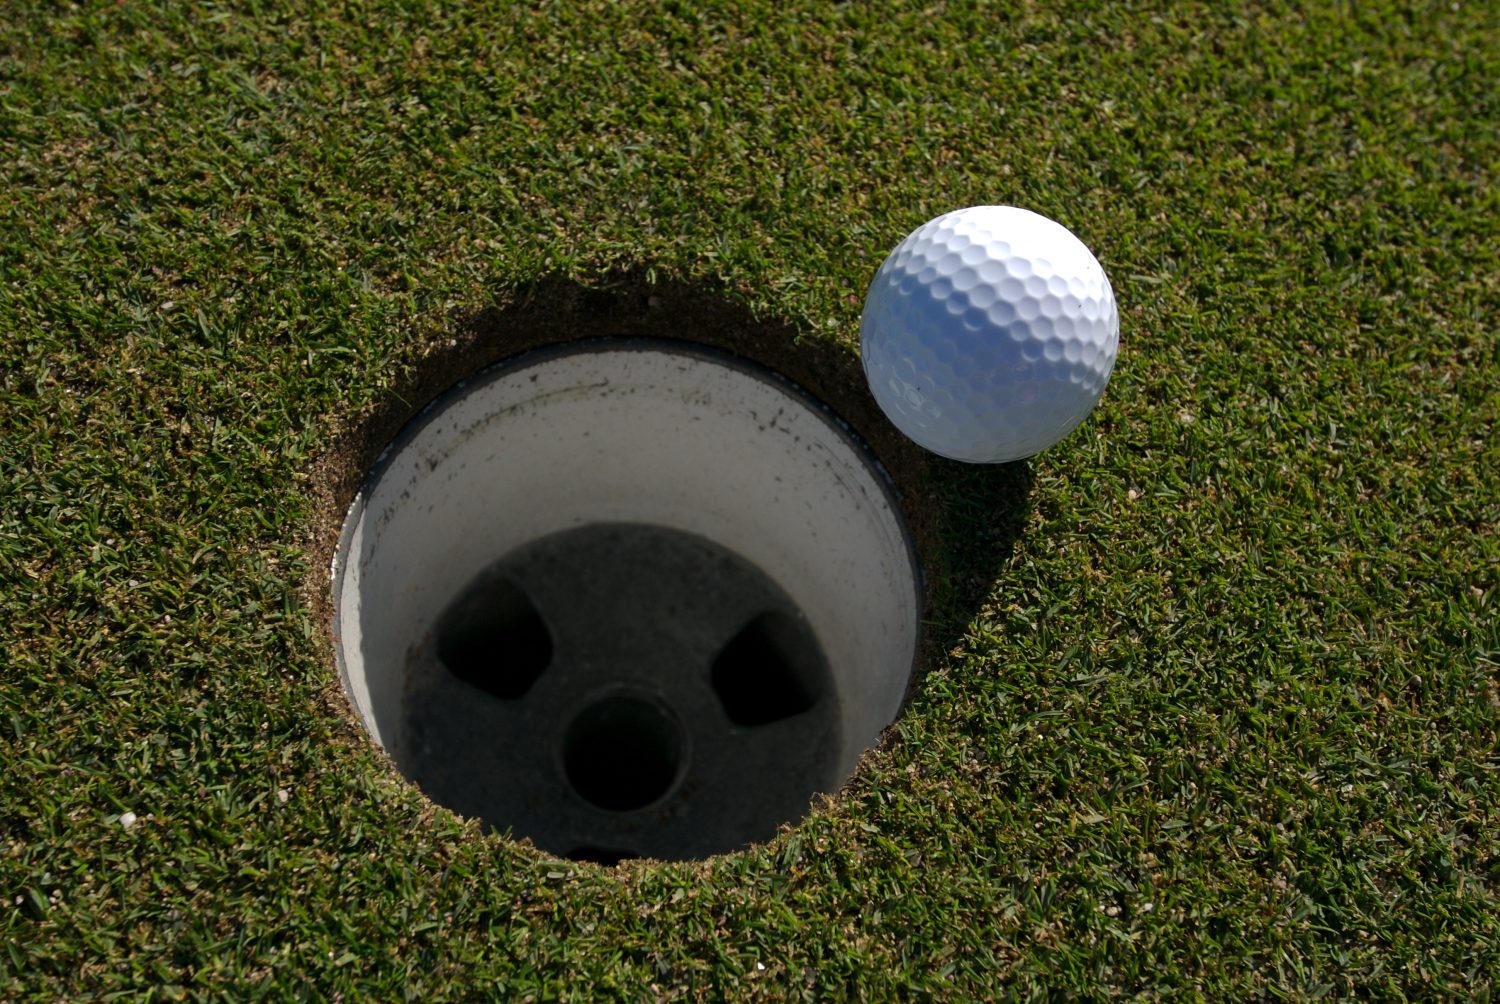 Overhead view of golf ball next to hole